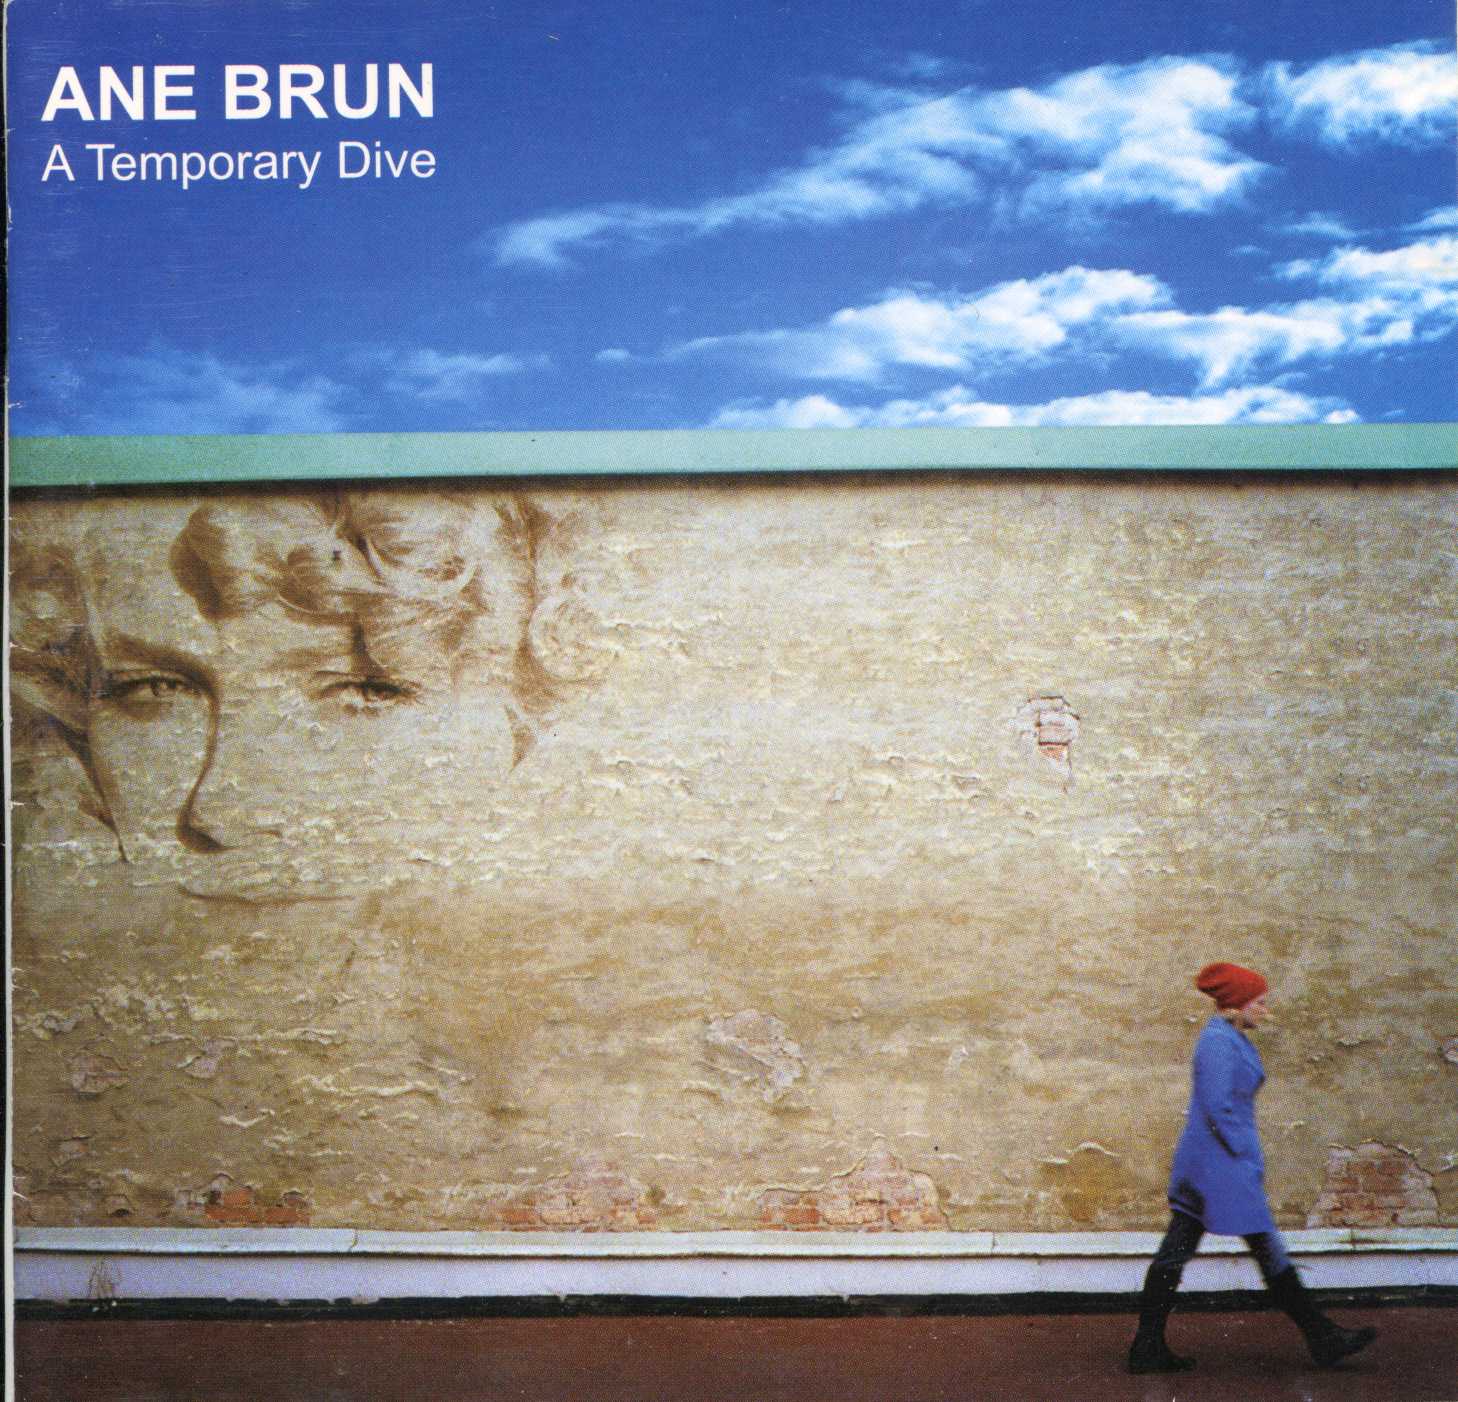 Ane brun to let myself go. Ane Brun - a temporary Dive (2005) - картинки. Ane Brun - leave me Breathless (2017). Ane Brun album. Ane Brun - it all starts with one (2011) - картинки.